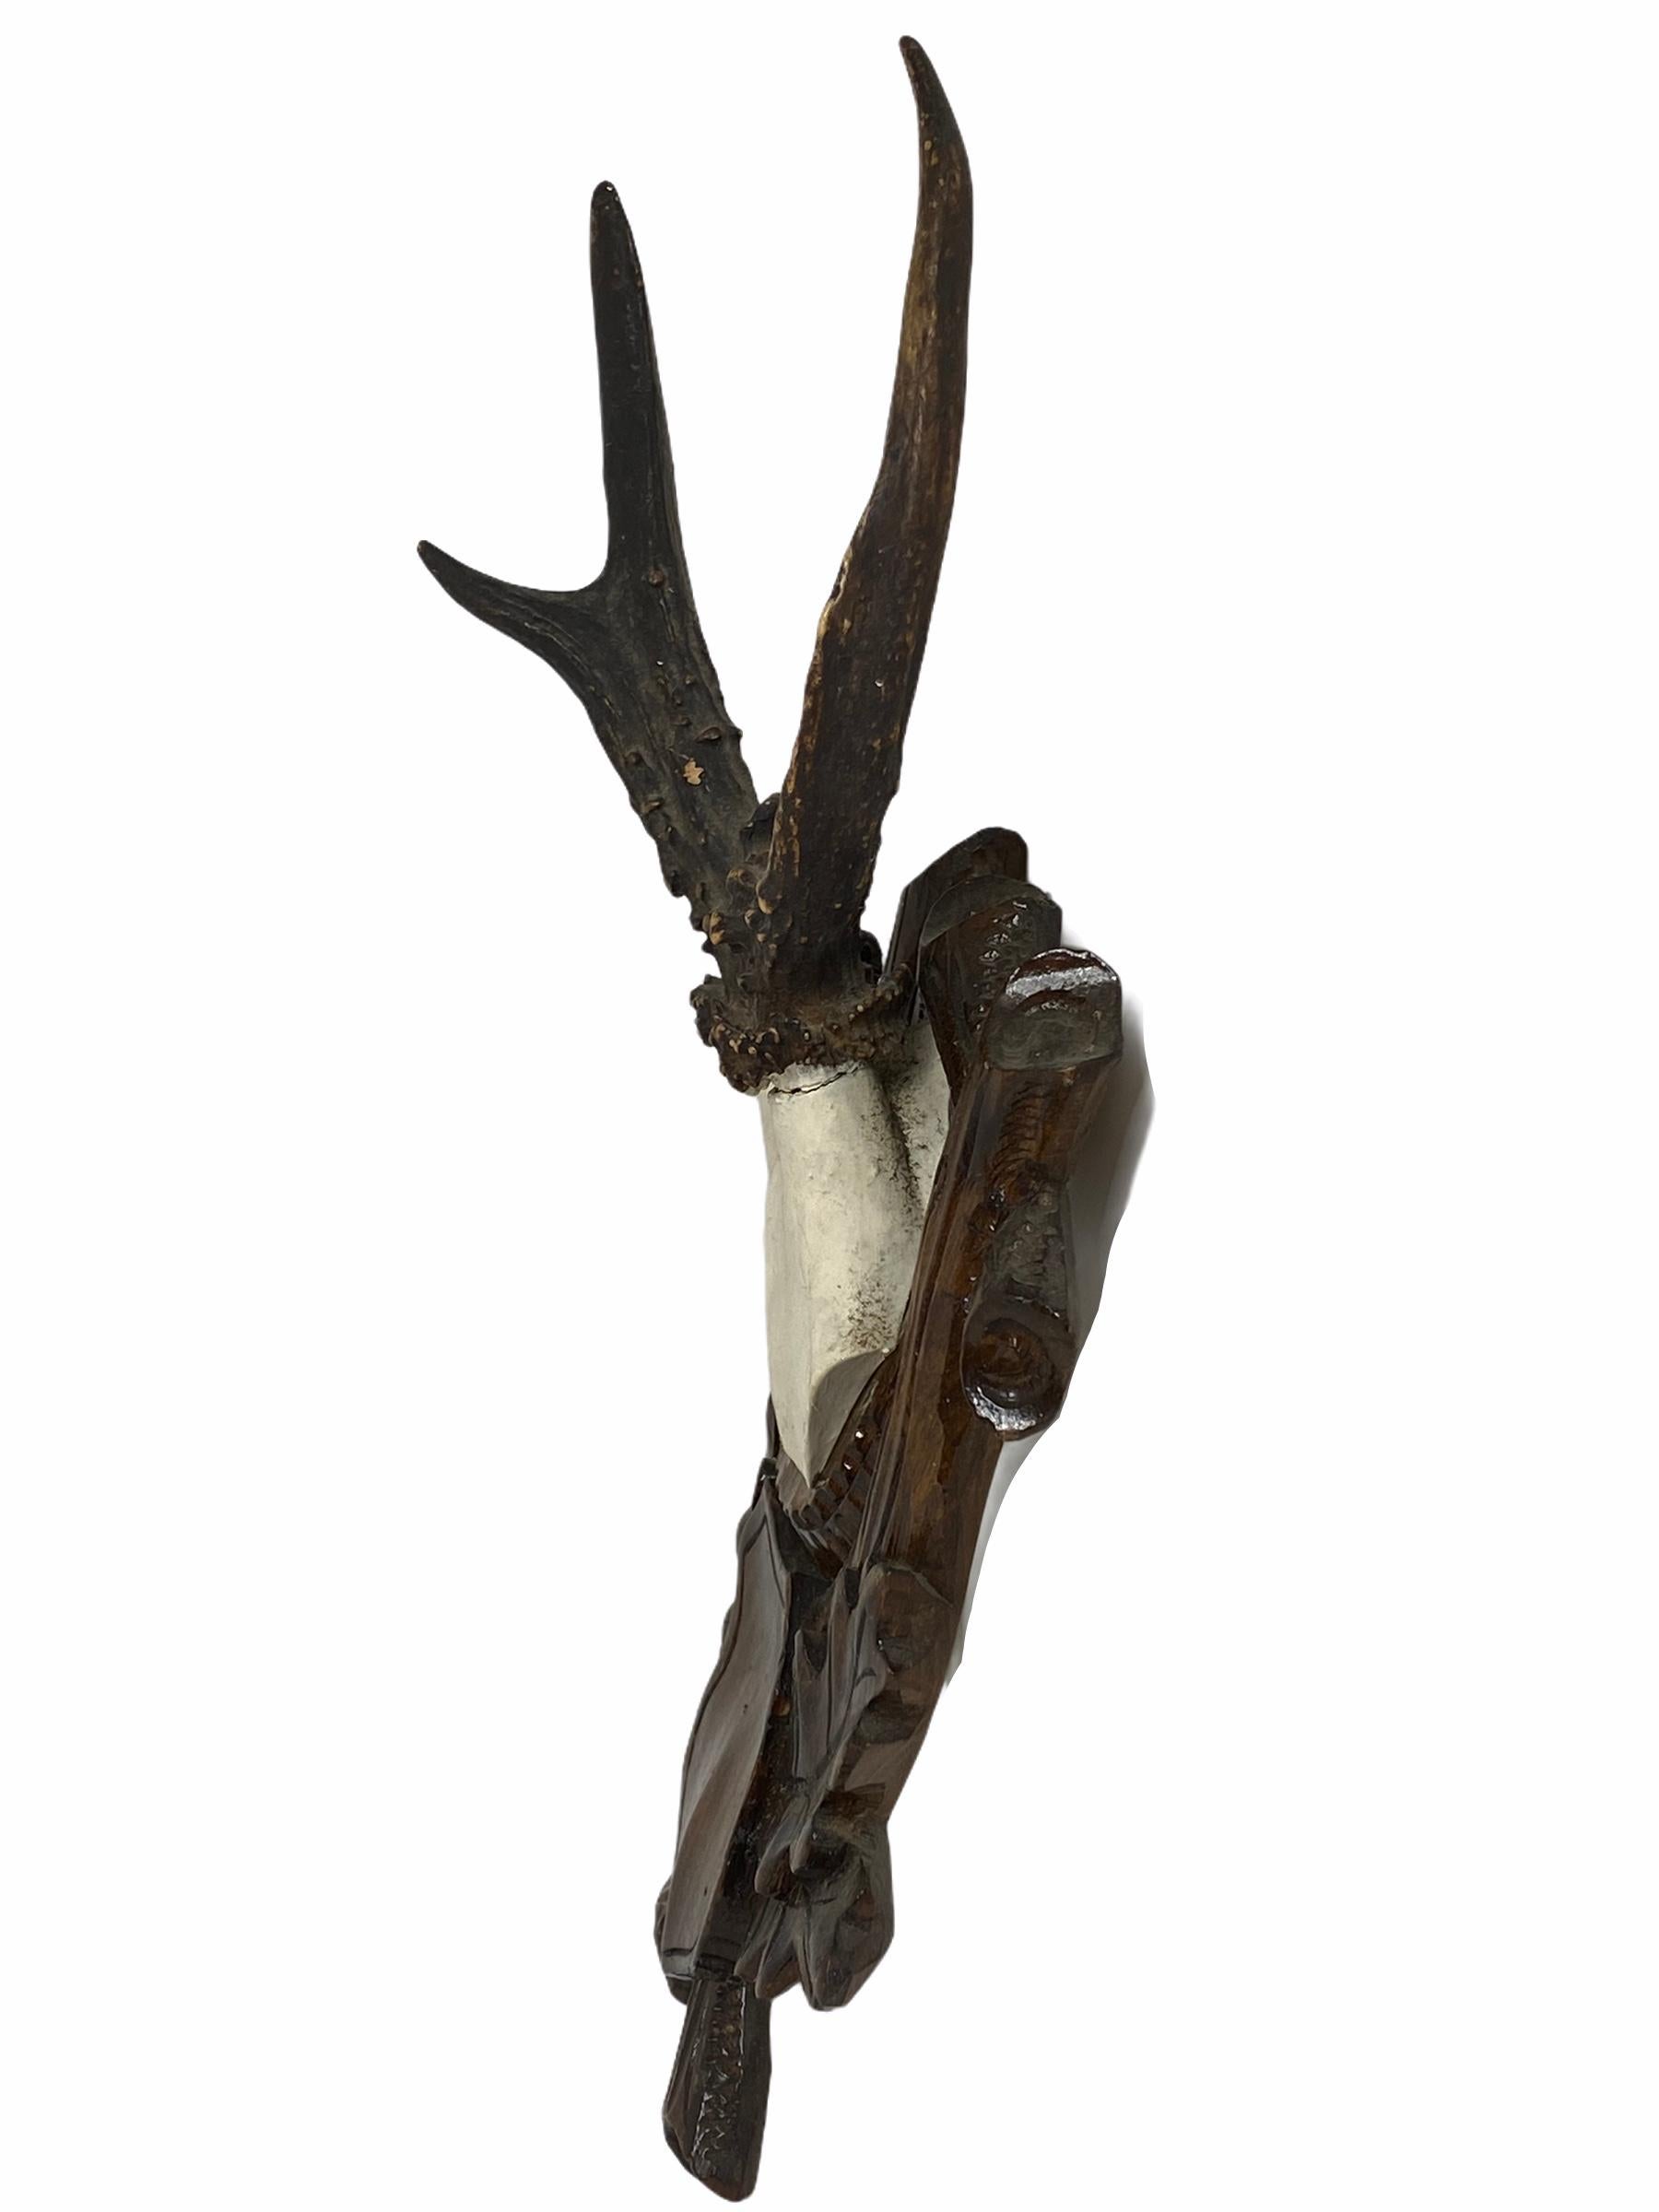 A beautiful antique Black Forest deer antler trophy on hand carved, Black Forest wooden plaque. A nice addition to your hunters loge, Cabin or just to display it in your house. Found at an estate sale in Vienna, Austria.